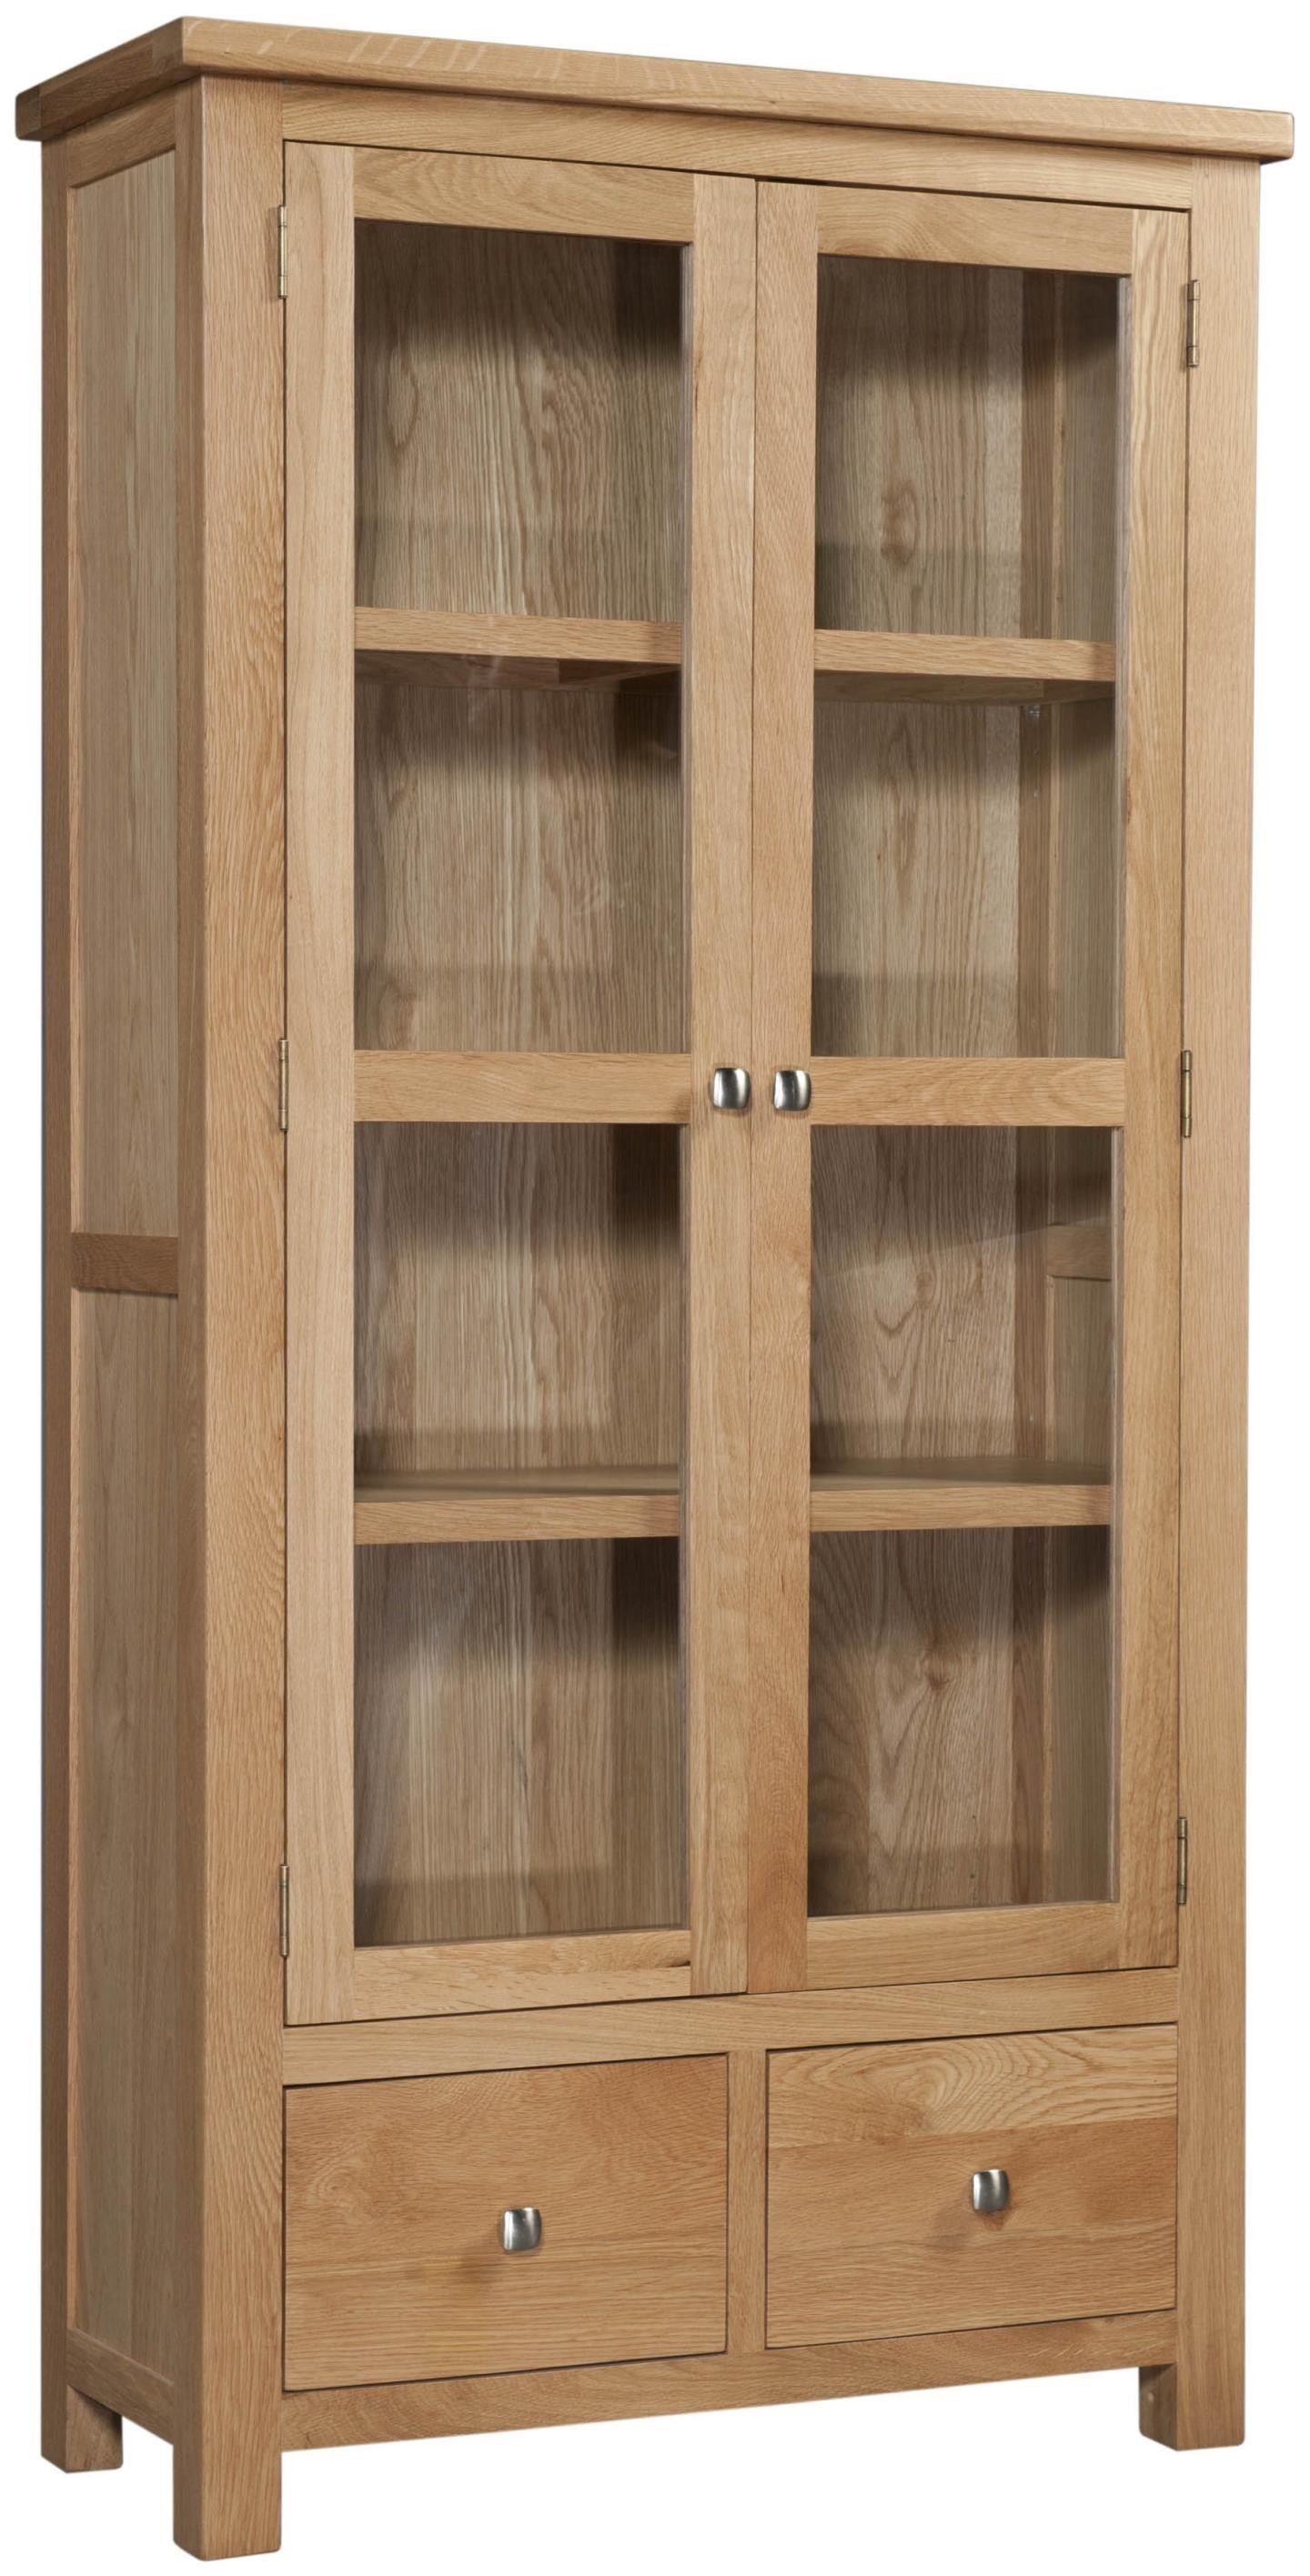 Abbey Oak Display Cabinet With Glass Doors Muebles De Madera within sizing 1440 X 2832